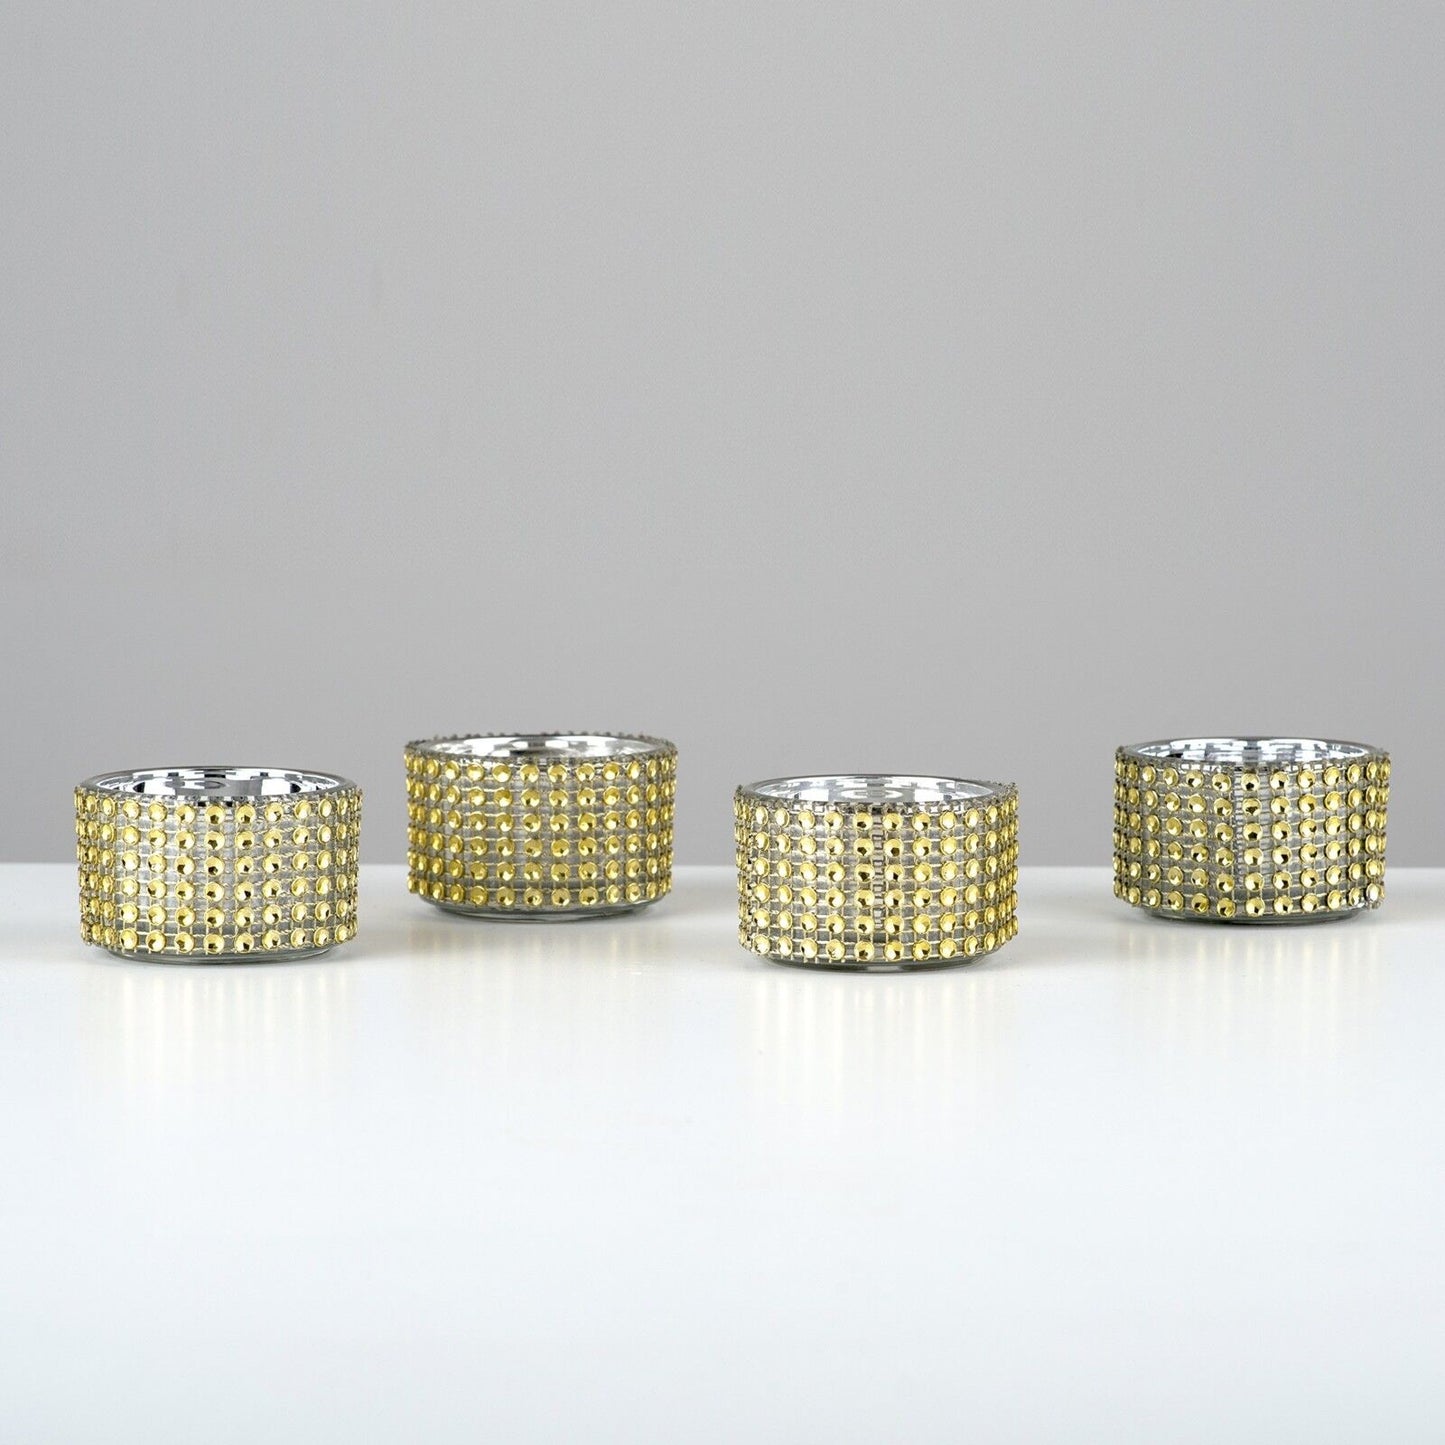 Pack of 4 - Decorative Gold Diamante Jewelled Tea light Candle Holders